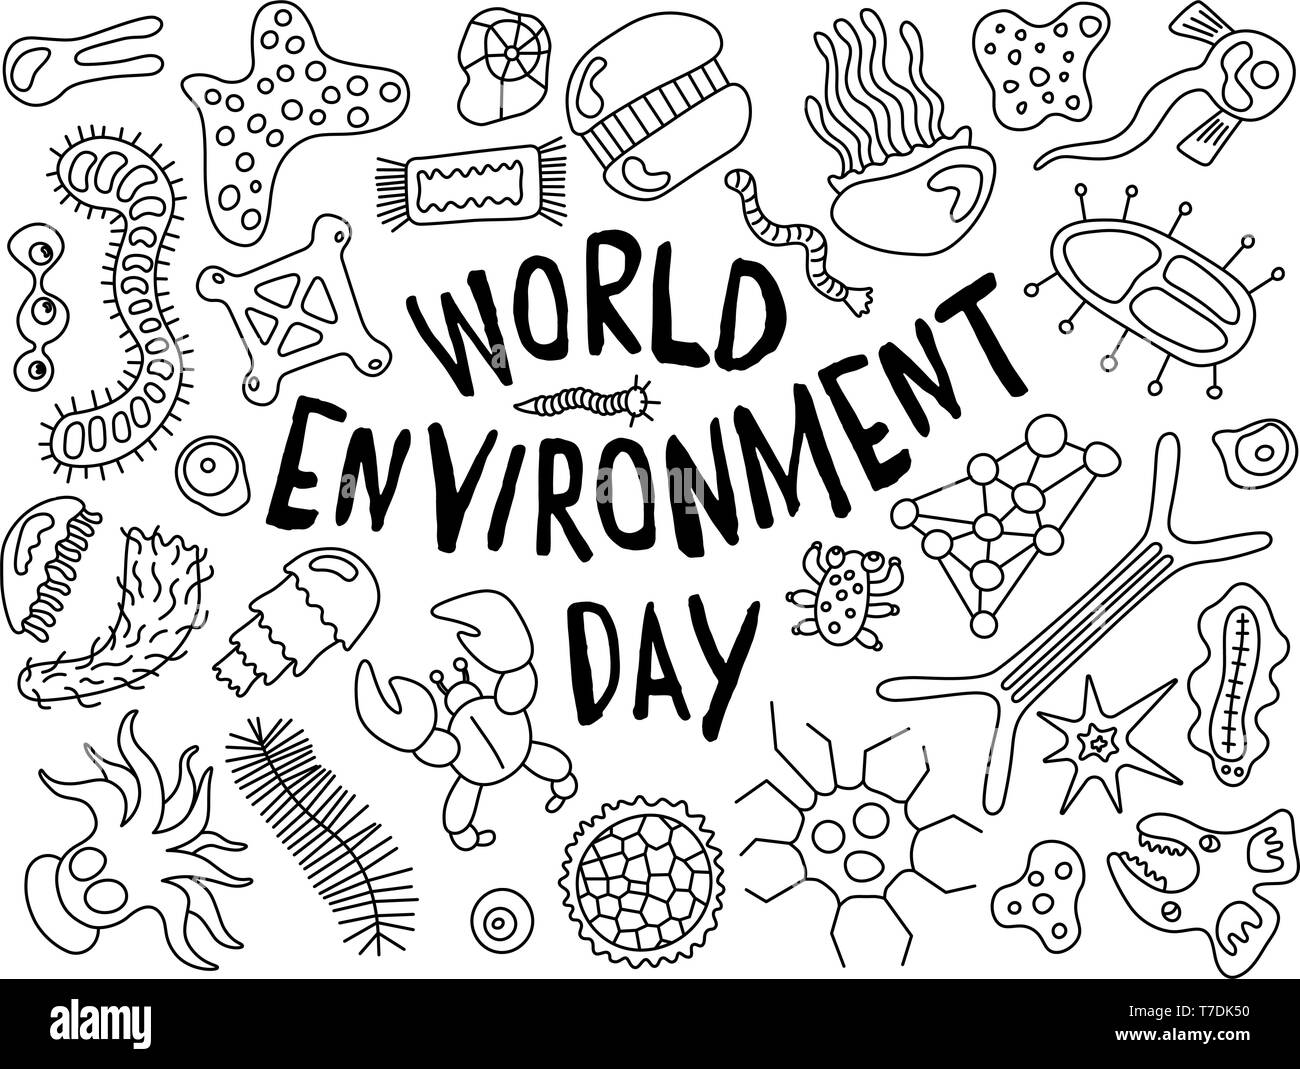 World environment day doodle. Various microorganisms background pattern. Backdrop with infectious germs, protists, microbes, disease causing bacteria, Stock Vector